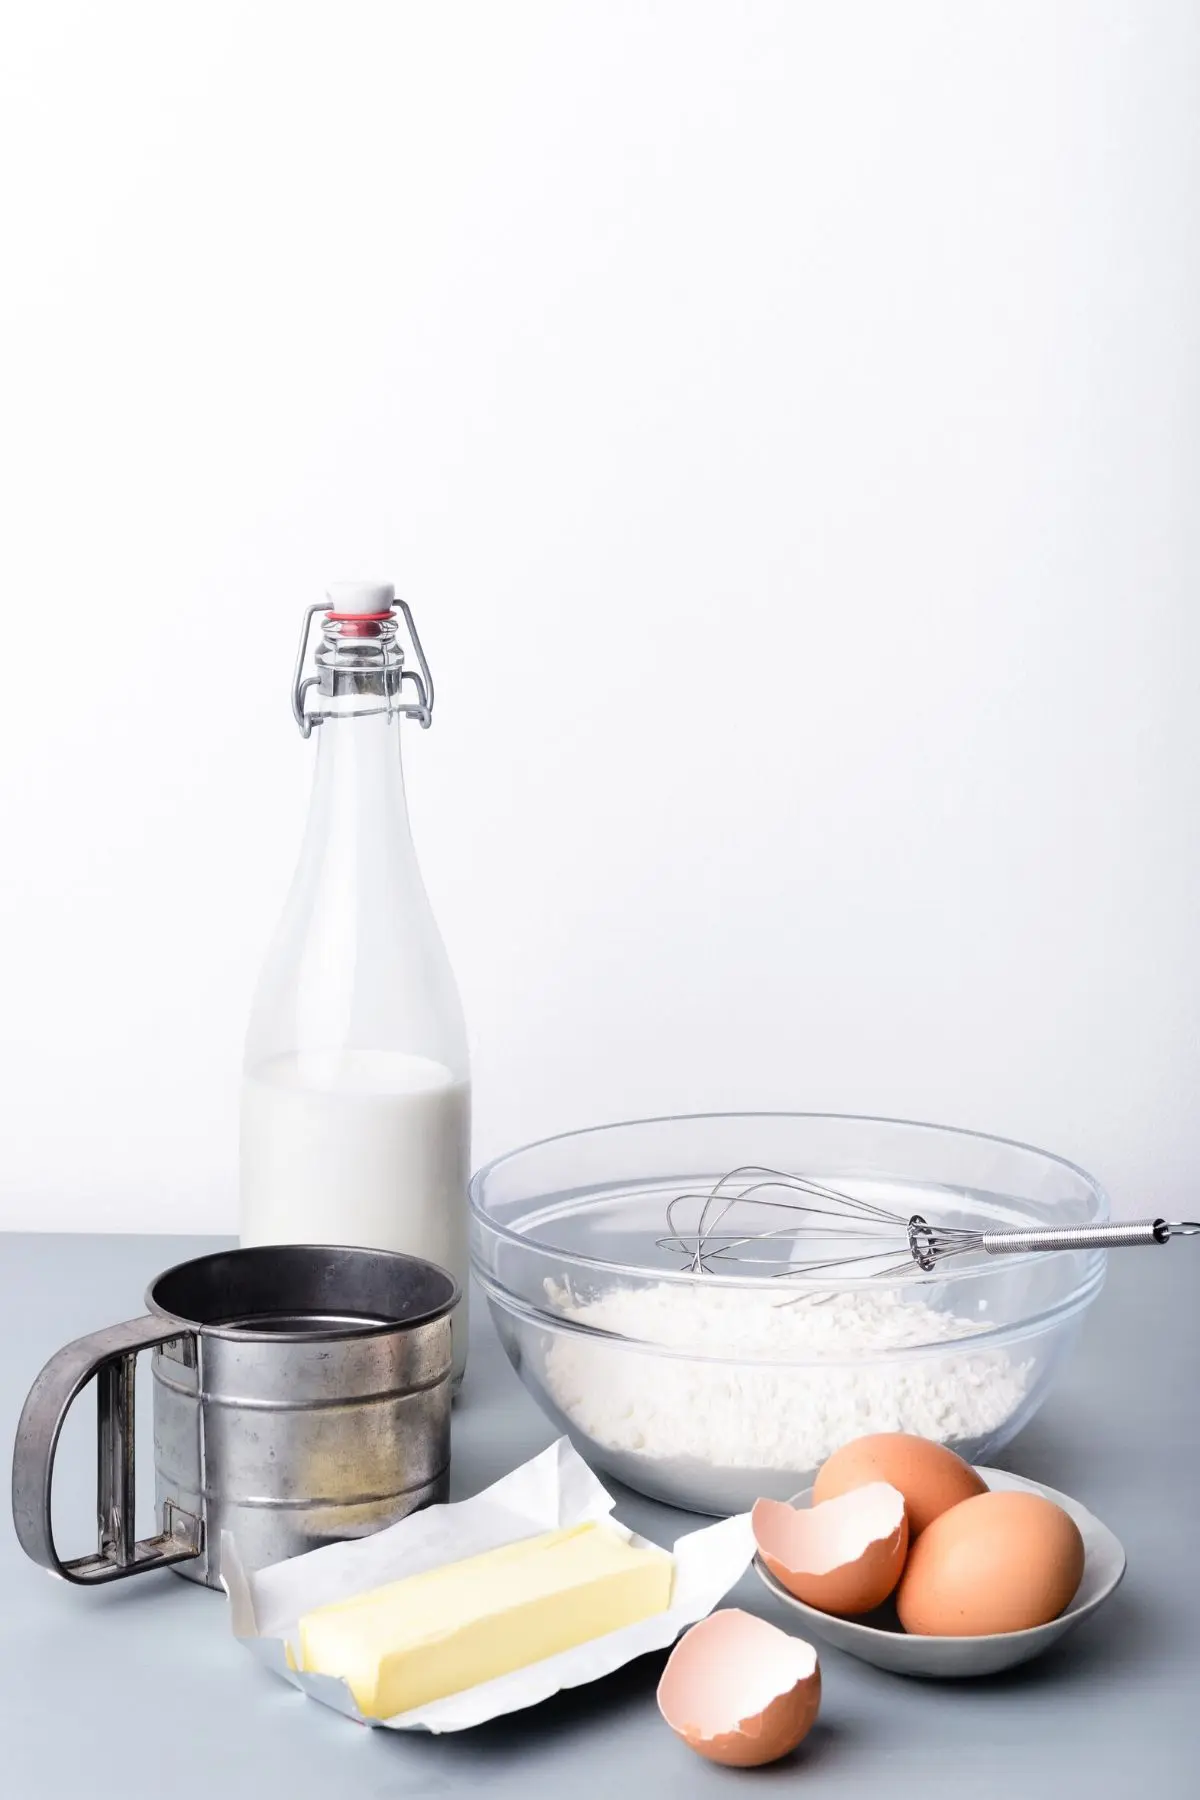 eggs, butter, flour in glass bowl, jar of milk, and metal flour sifter